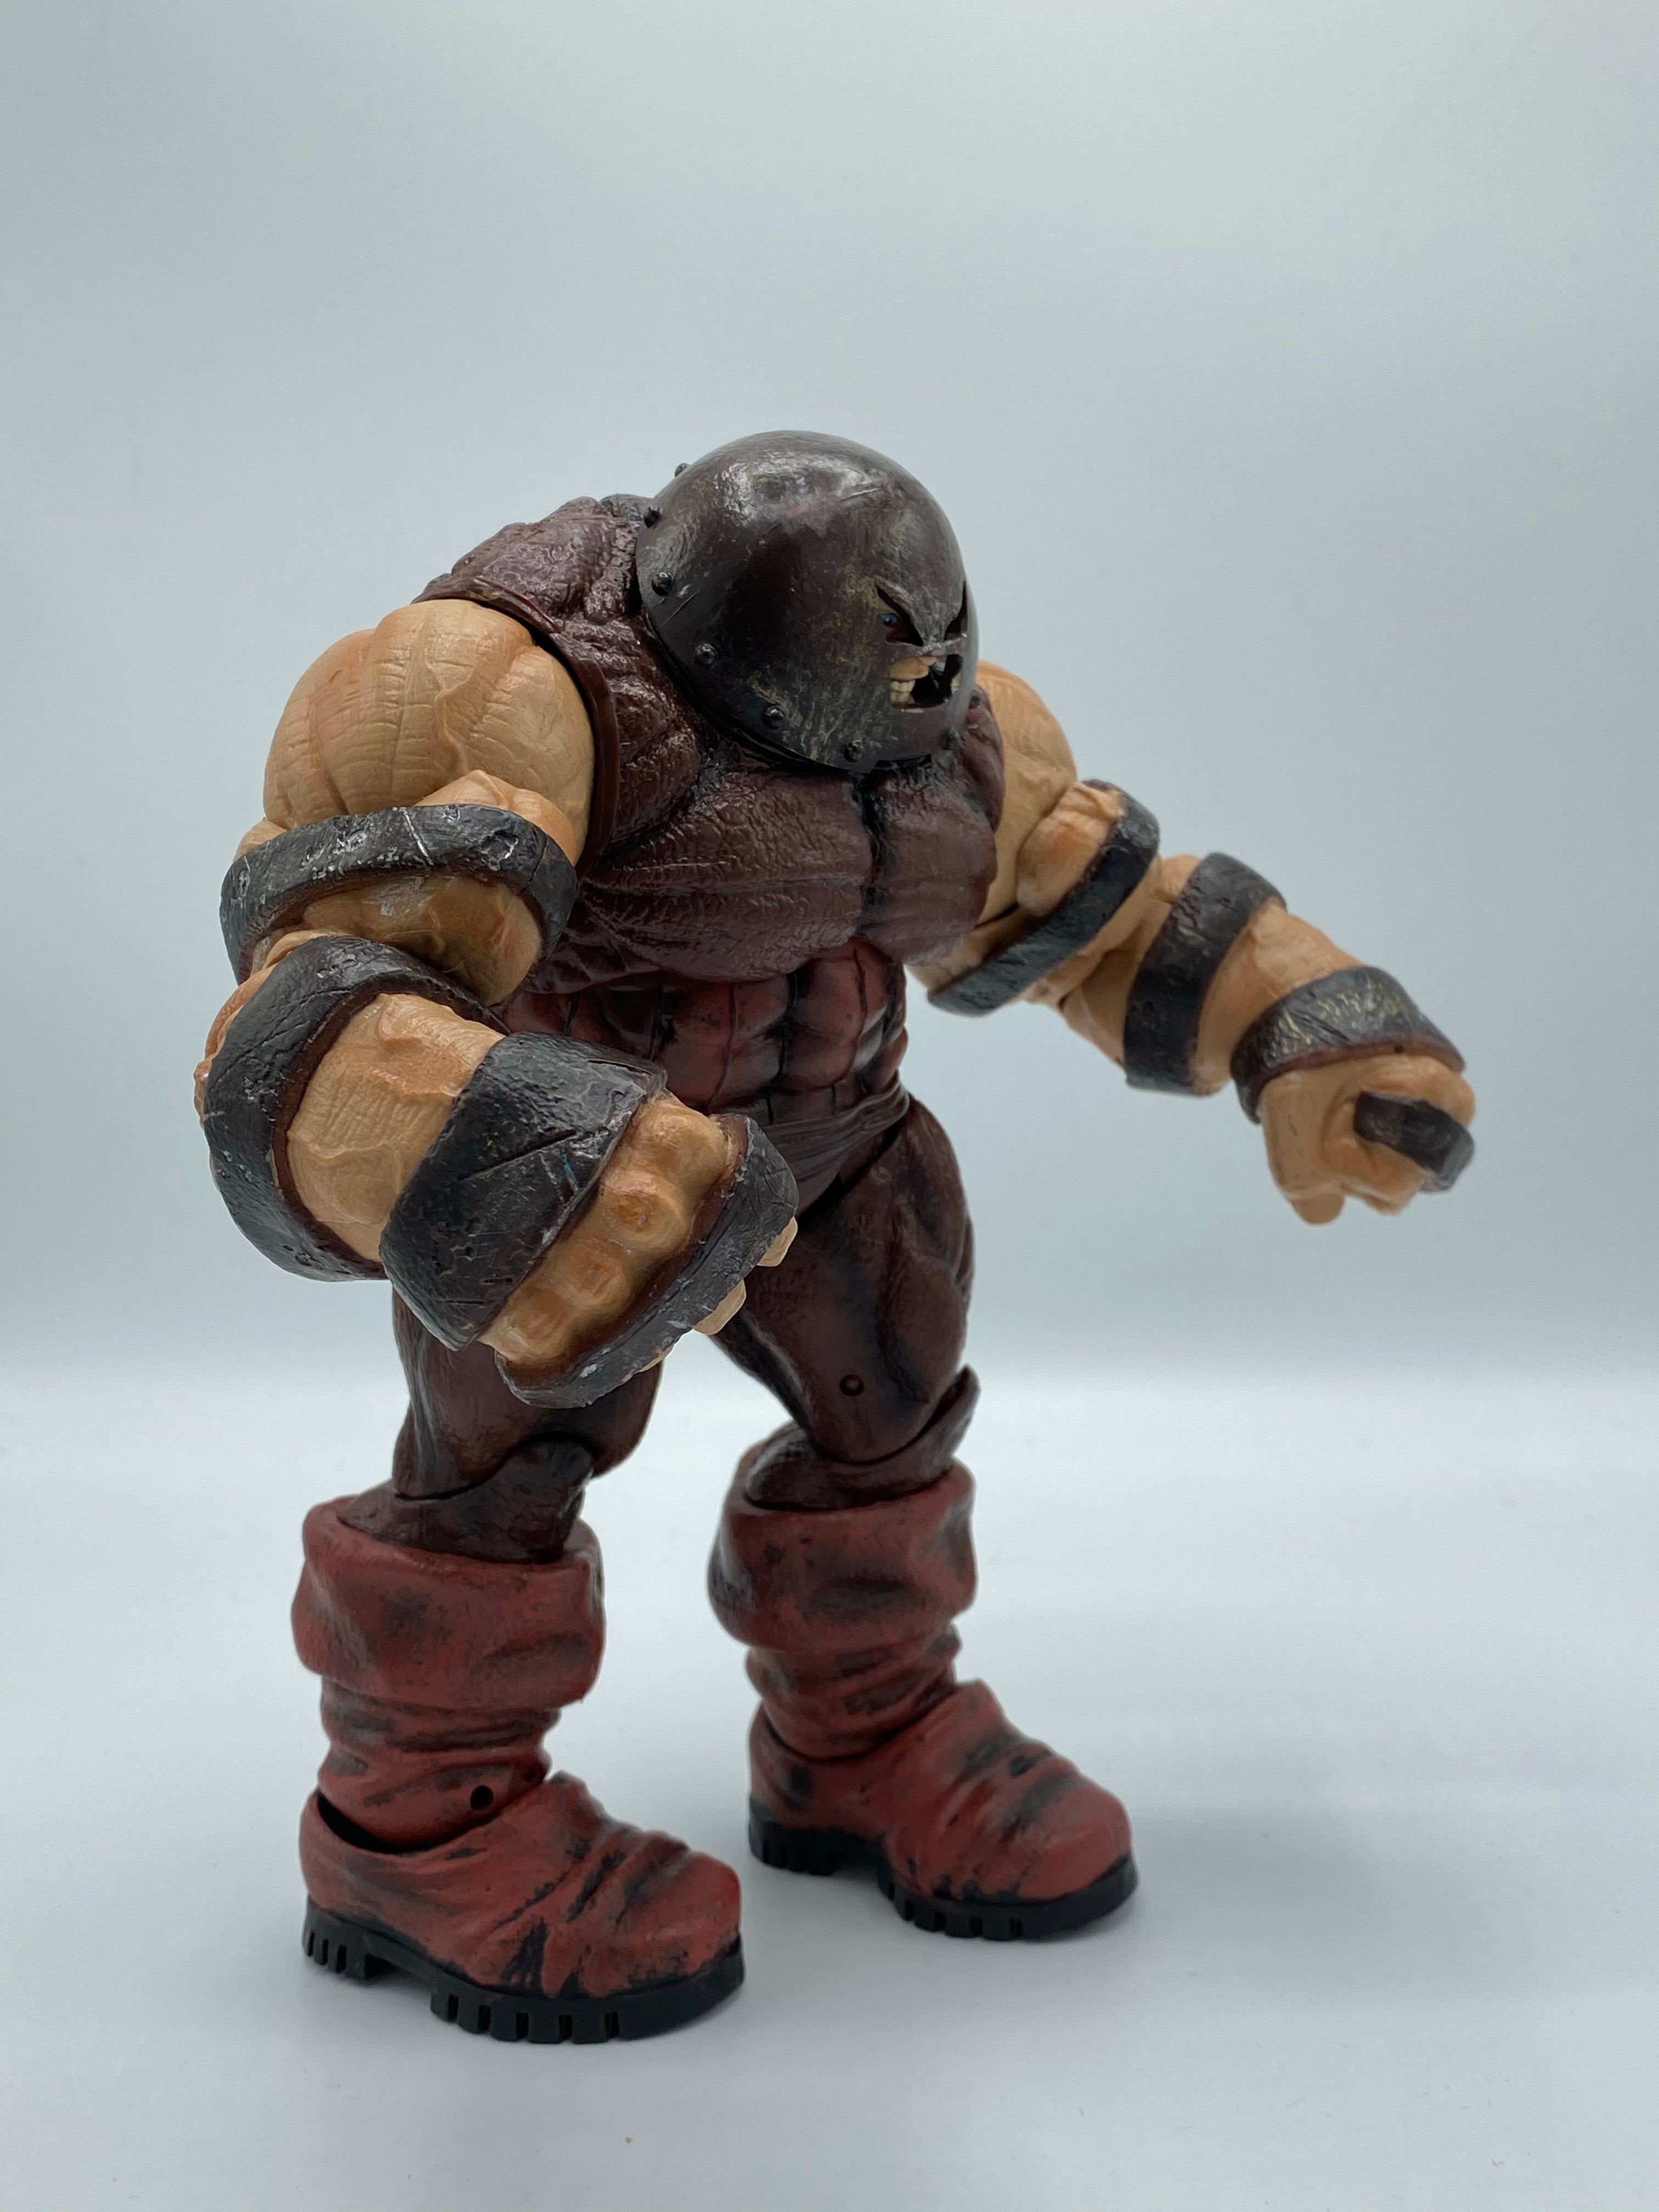 Juggarnaut Action Figure with movable joints